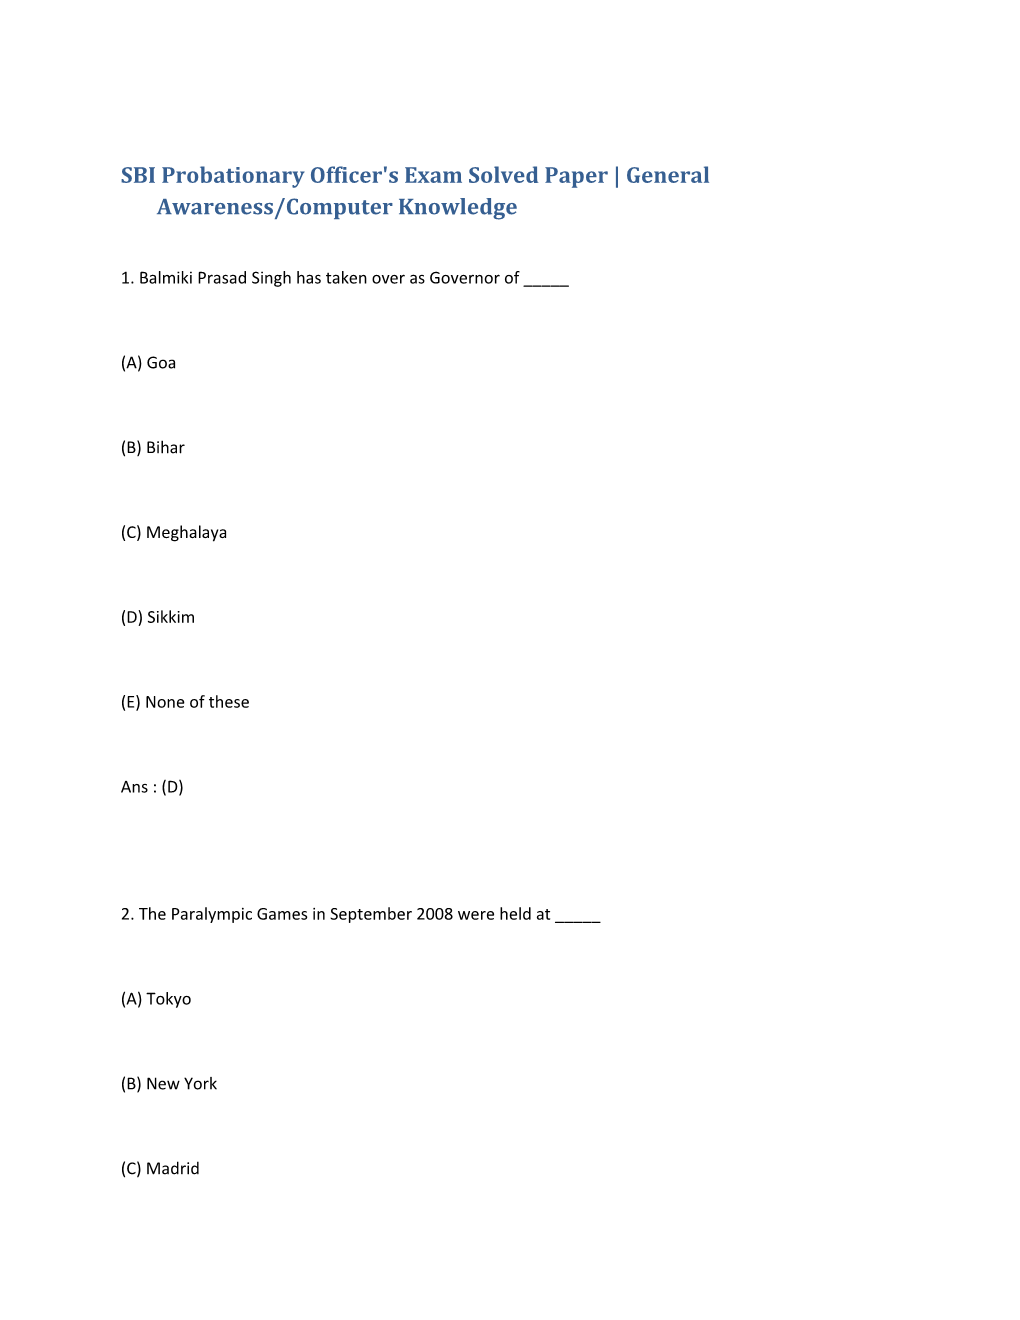 SBI Probationary Officer's Exam Solved Paper General Awareness/Computer Knowledge